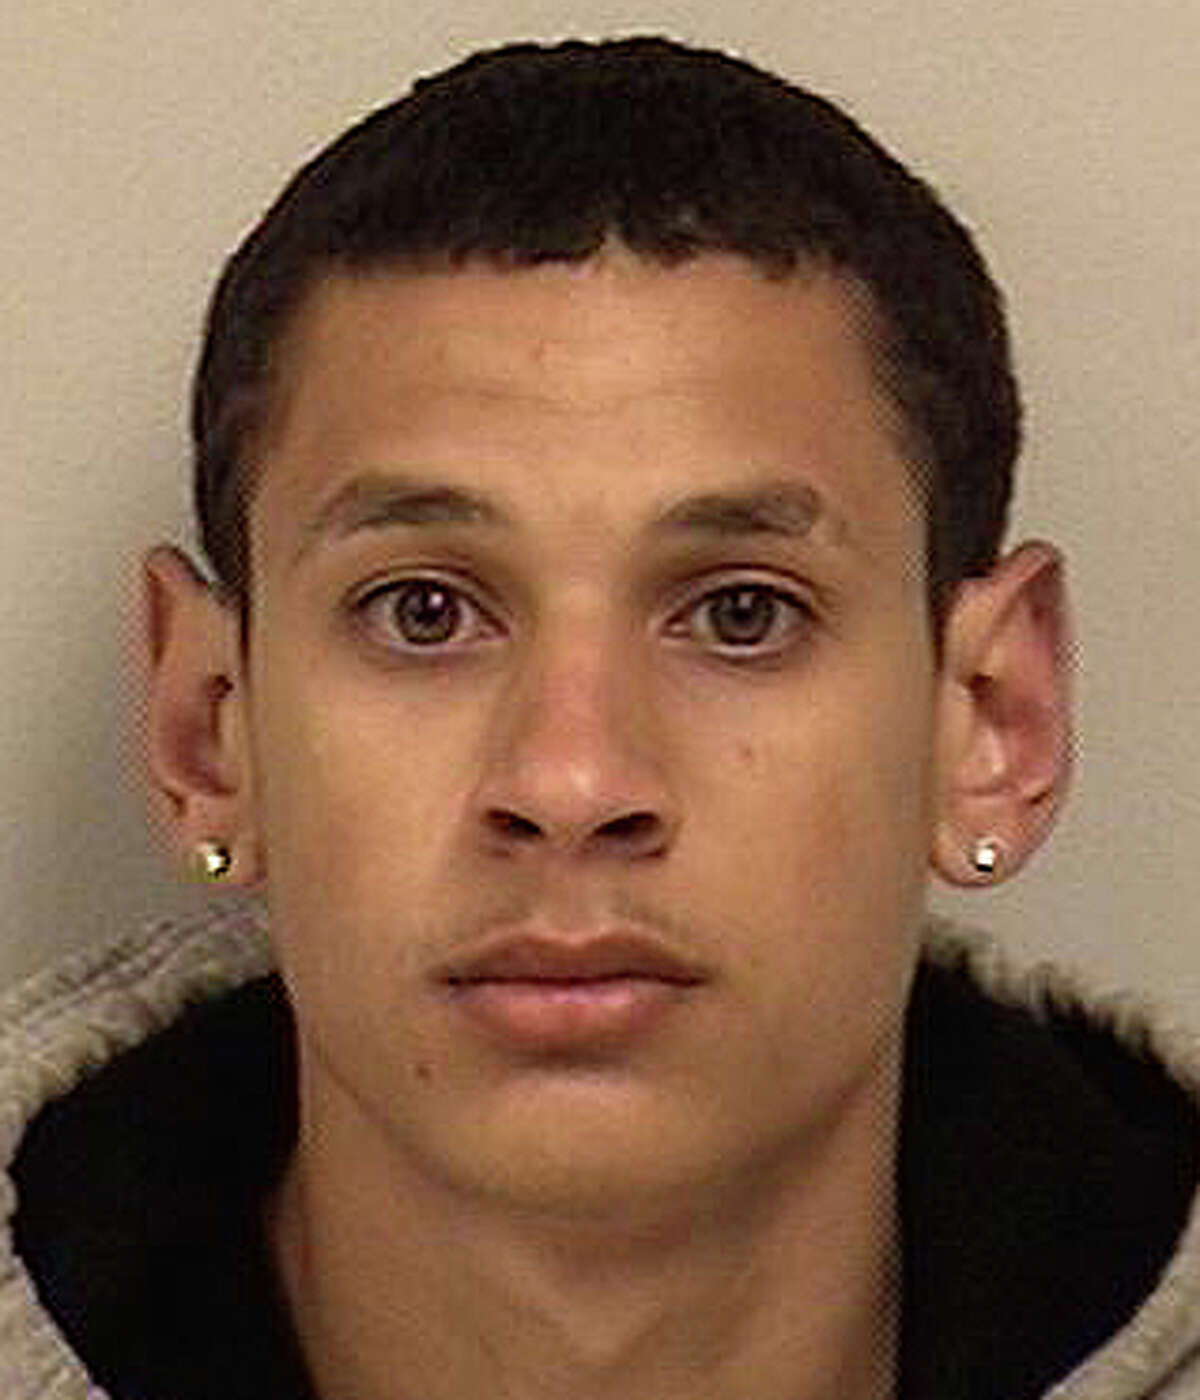 Anthony Santiago, 20, of Bridgeport has been charged with the armed robbery of the TD Bank office on Post Road East.